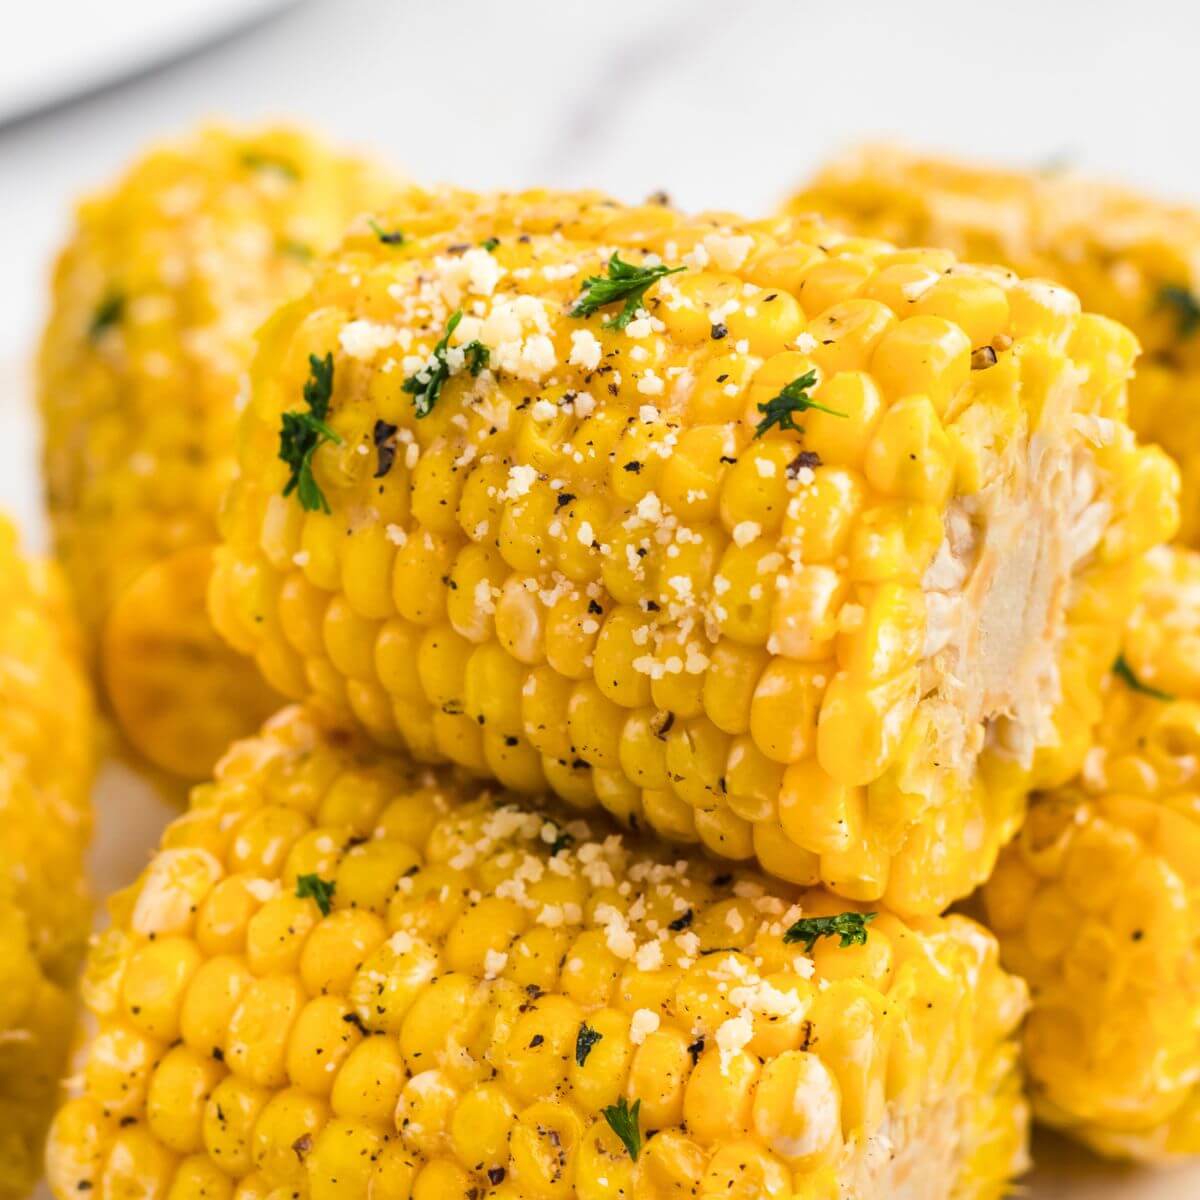 Golden yellow ears of corn stacked and garnished with parmesan cheese and parsley flakes.